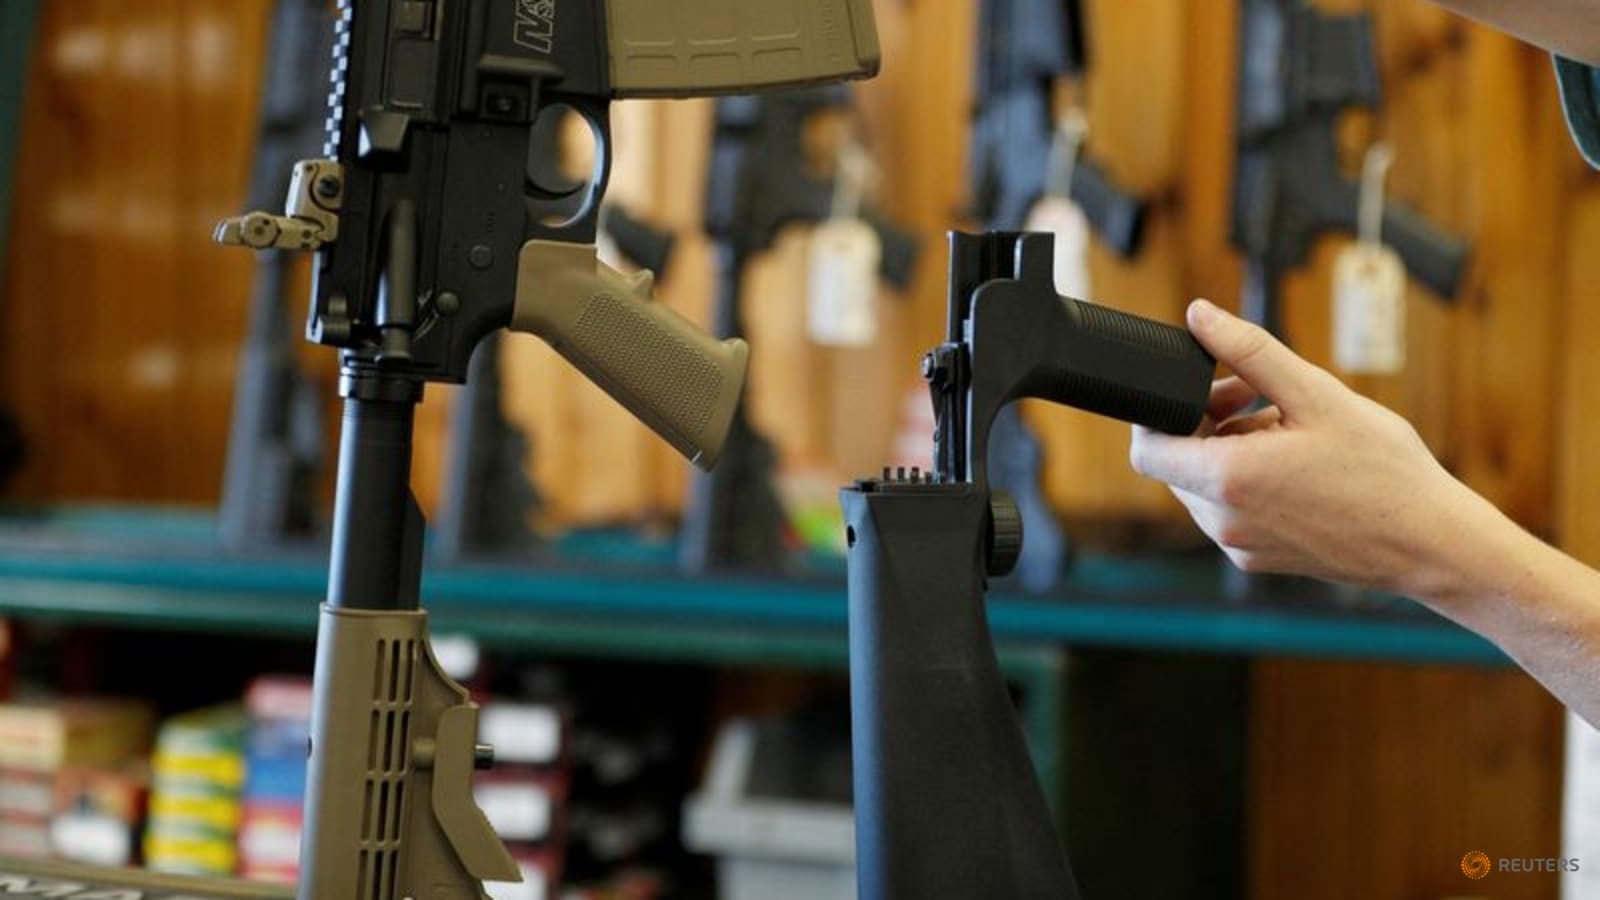 US Supreme Court rejects challenge to ban on gun 'bump stocks'